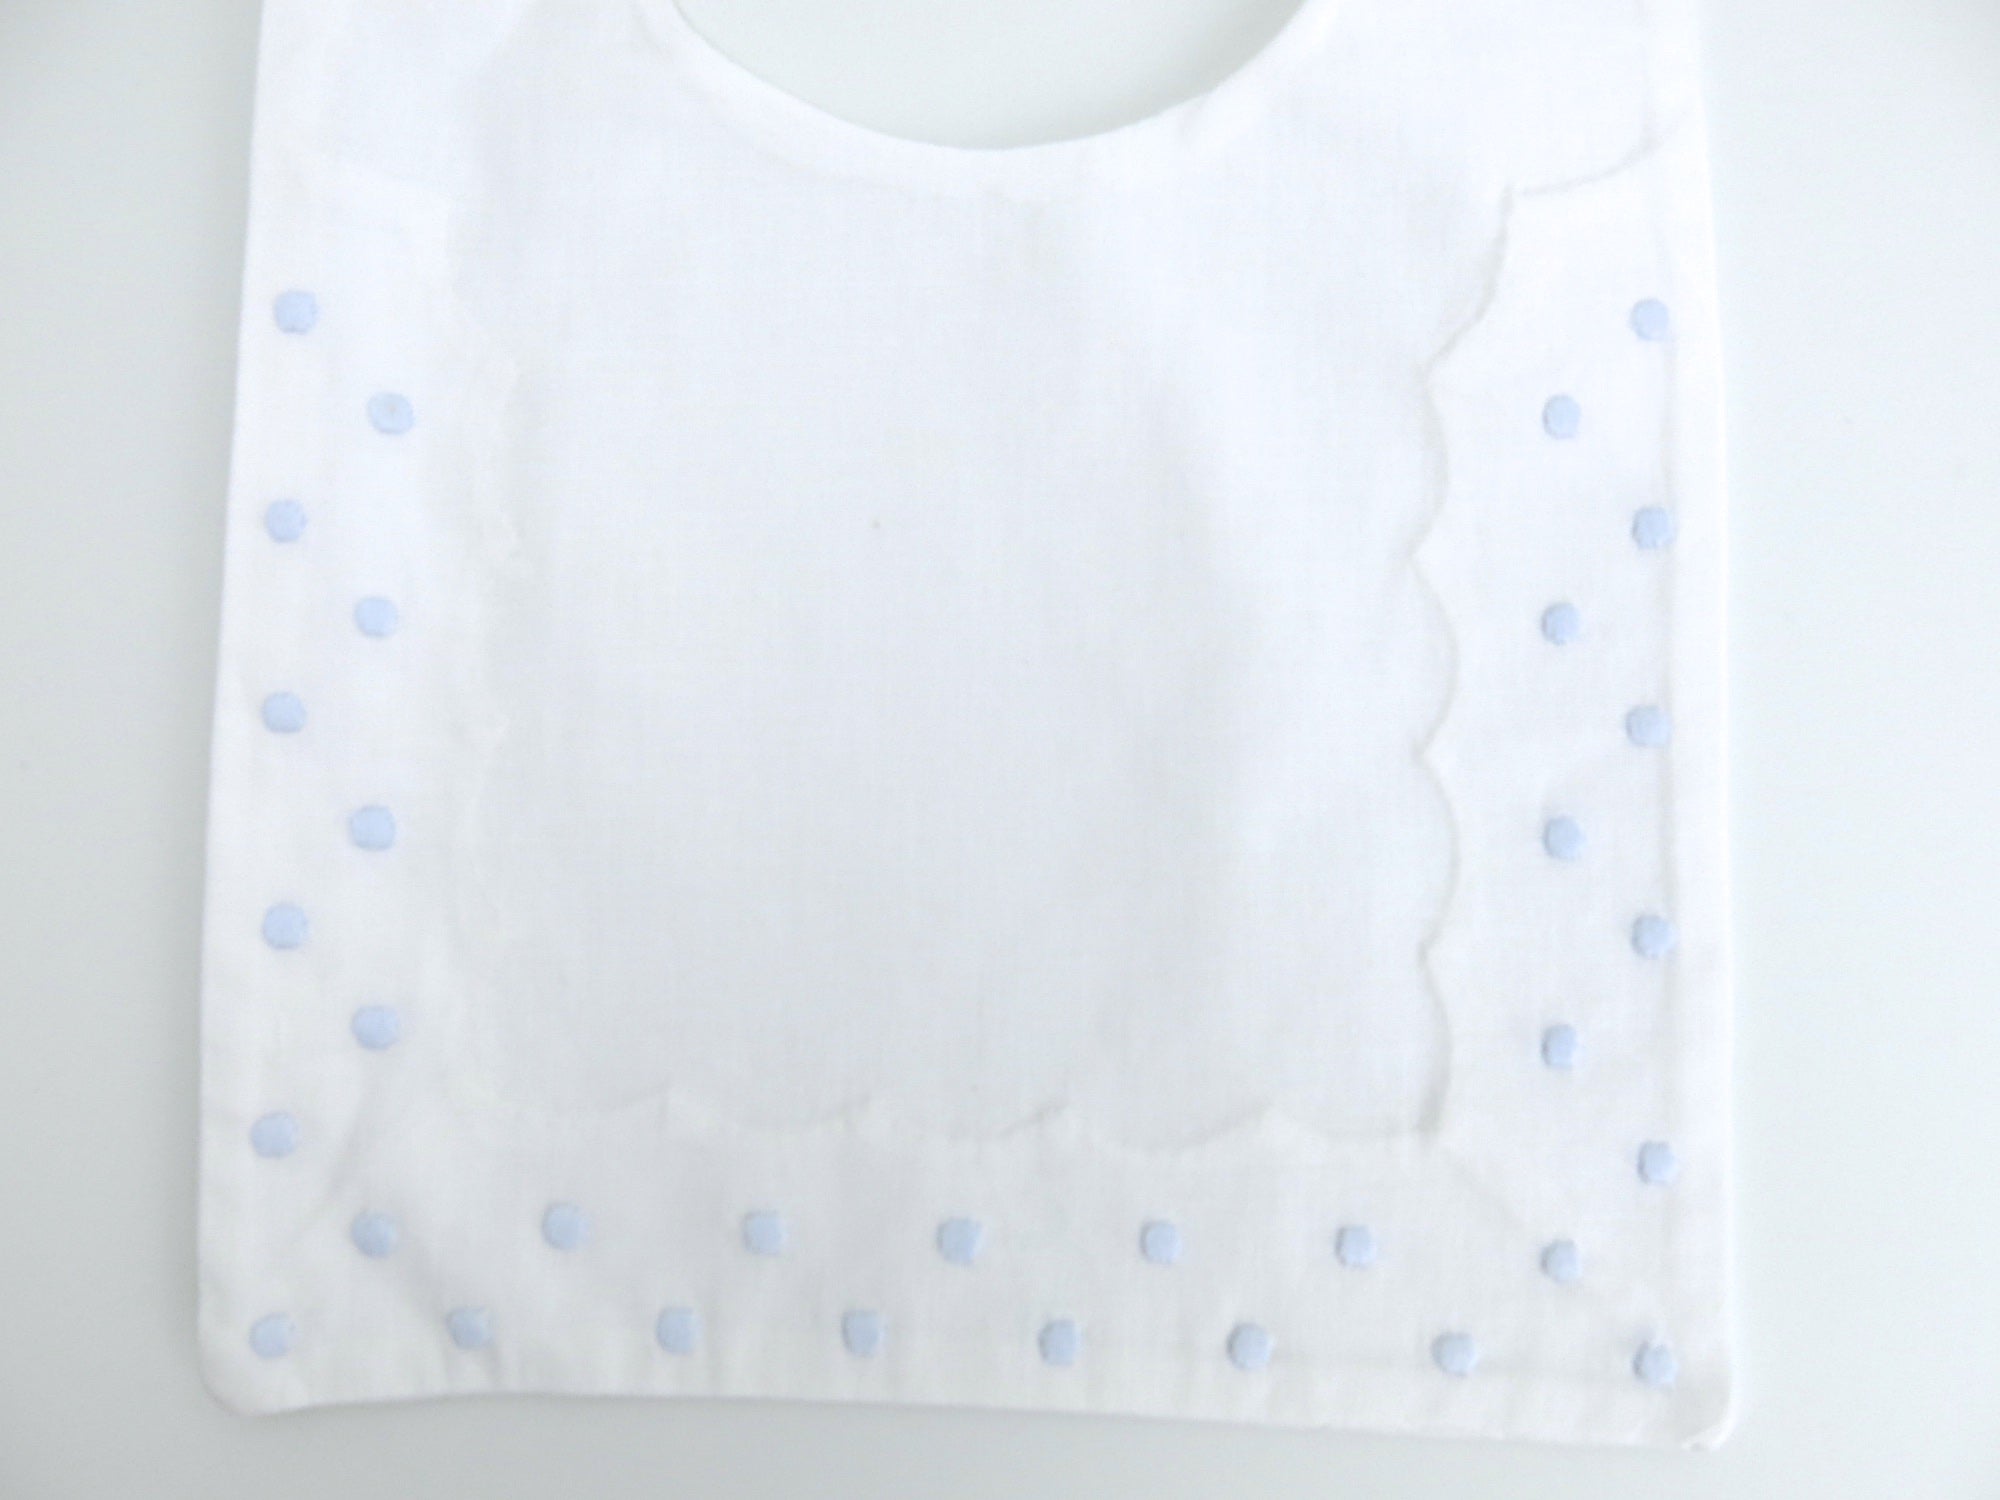 Cotton Baby Bib with Blue Swiss Dots Embroidery, set of 2